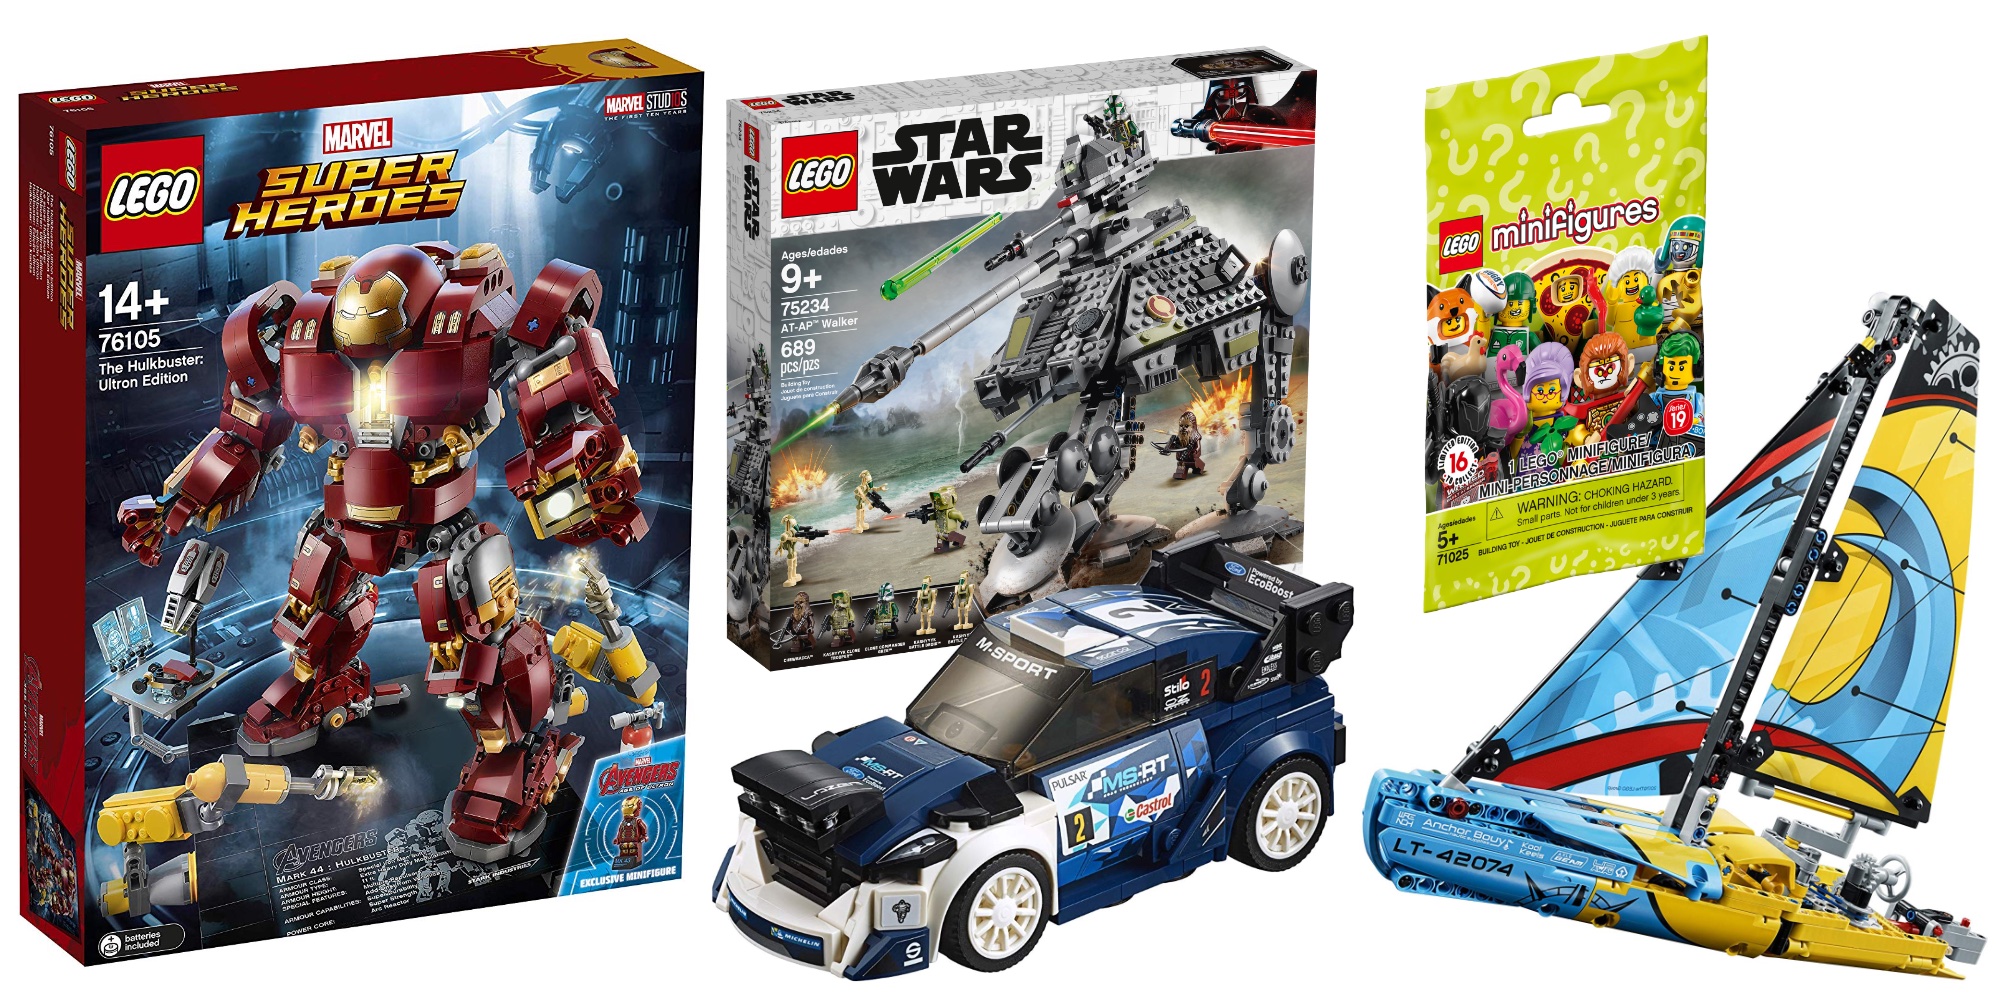 LEGO Cyber Monday deals Star Wars, Technic, more from 6 9to5Toys